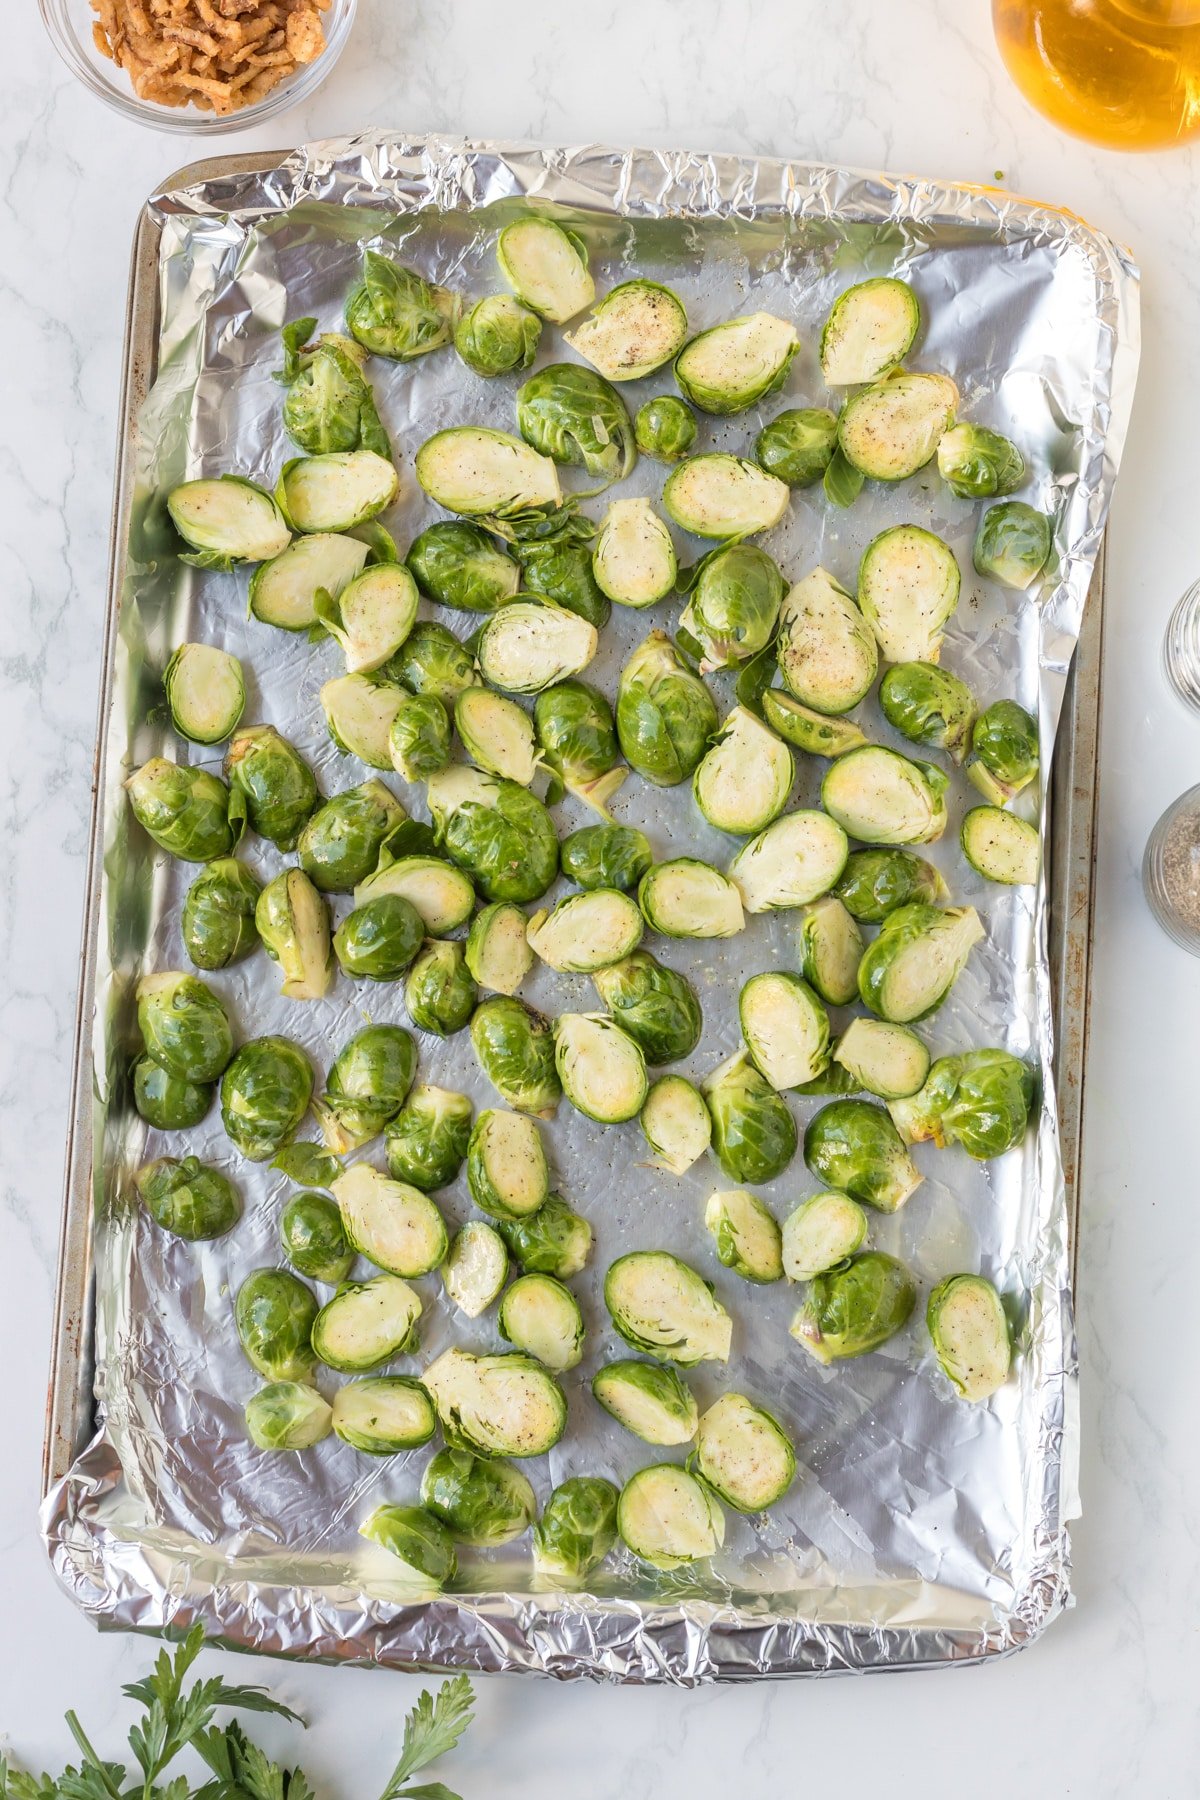 Sliced brussels sprouts laying on a foil-lined tray.